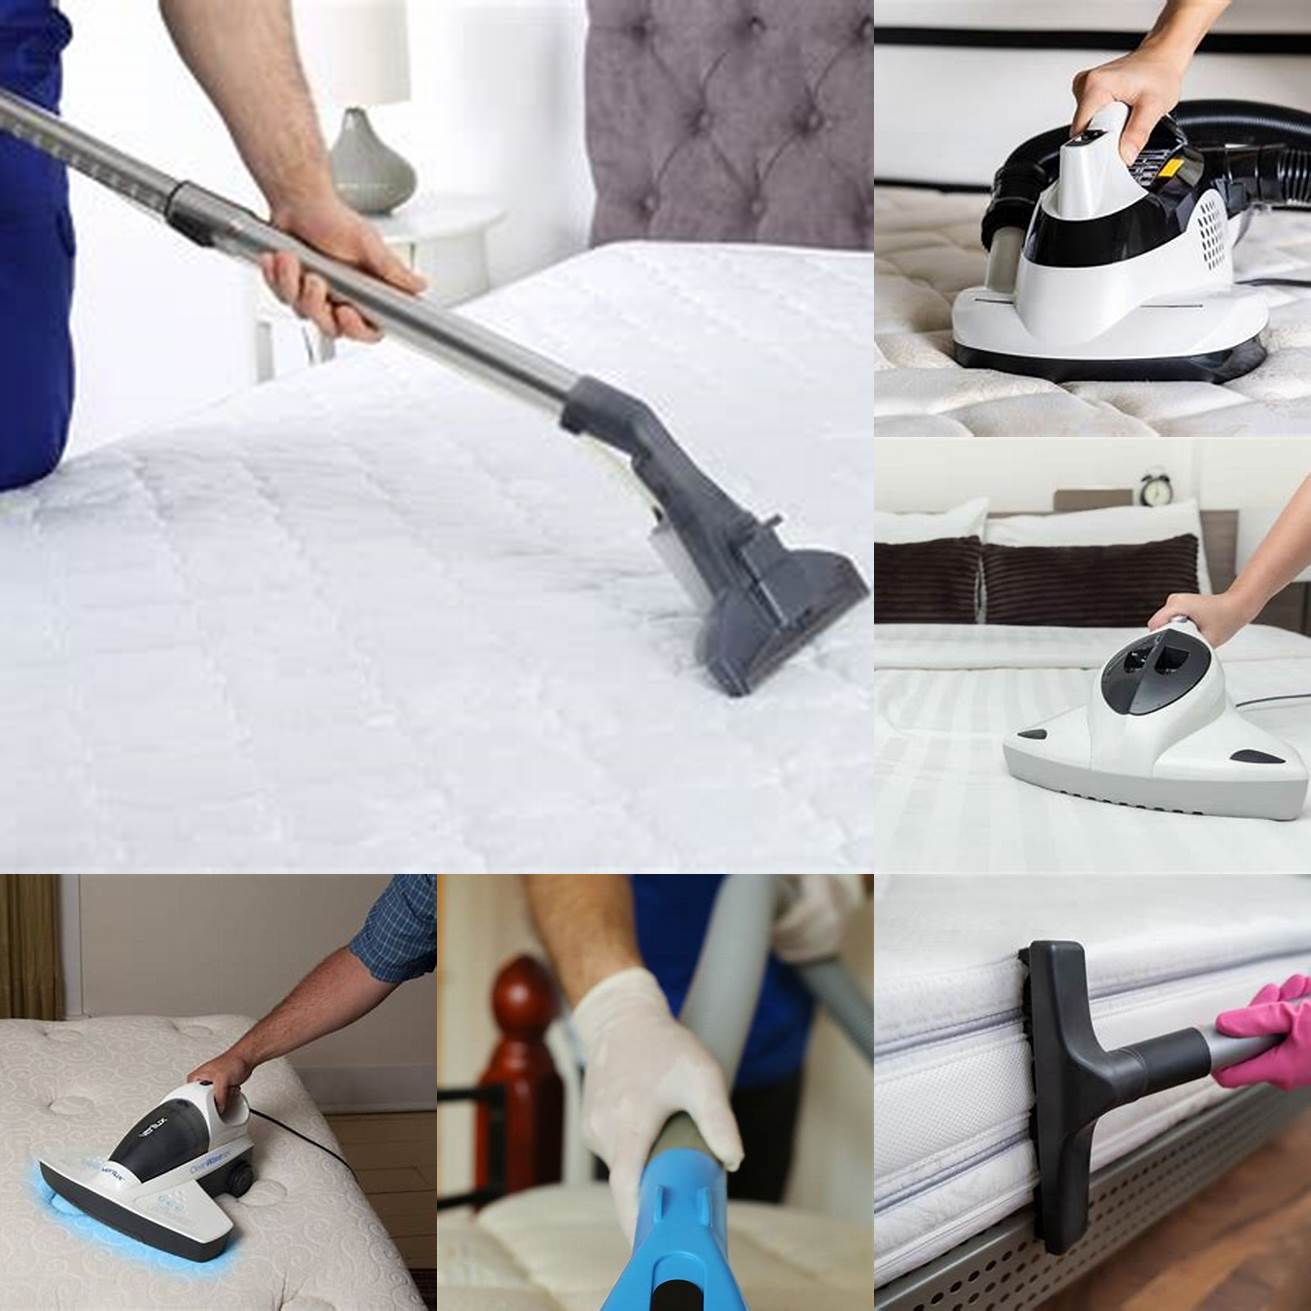 Vacuum your mattress regularly to remove dust and debris